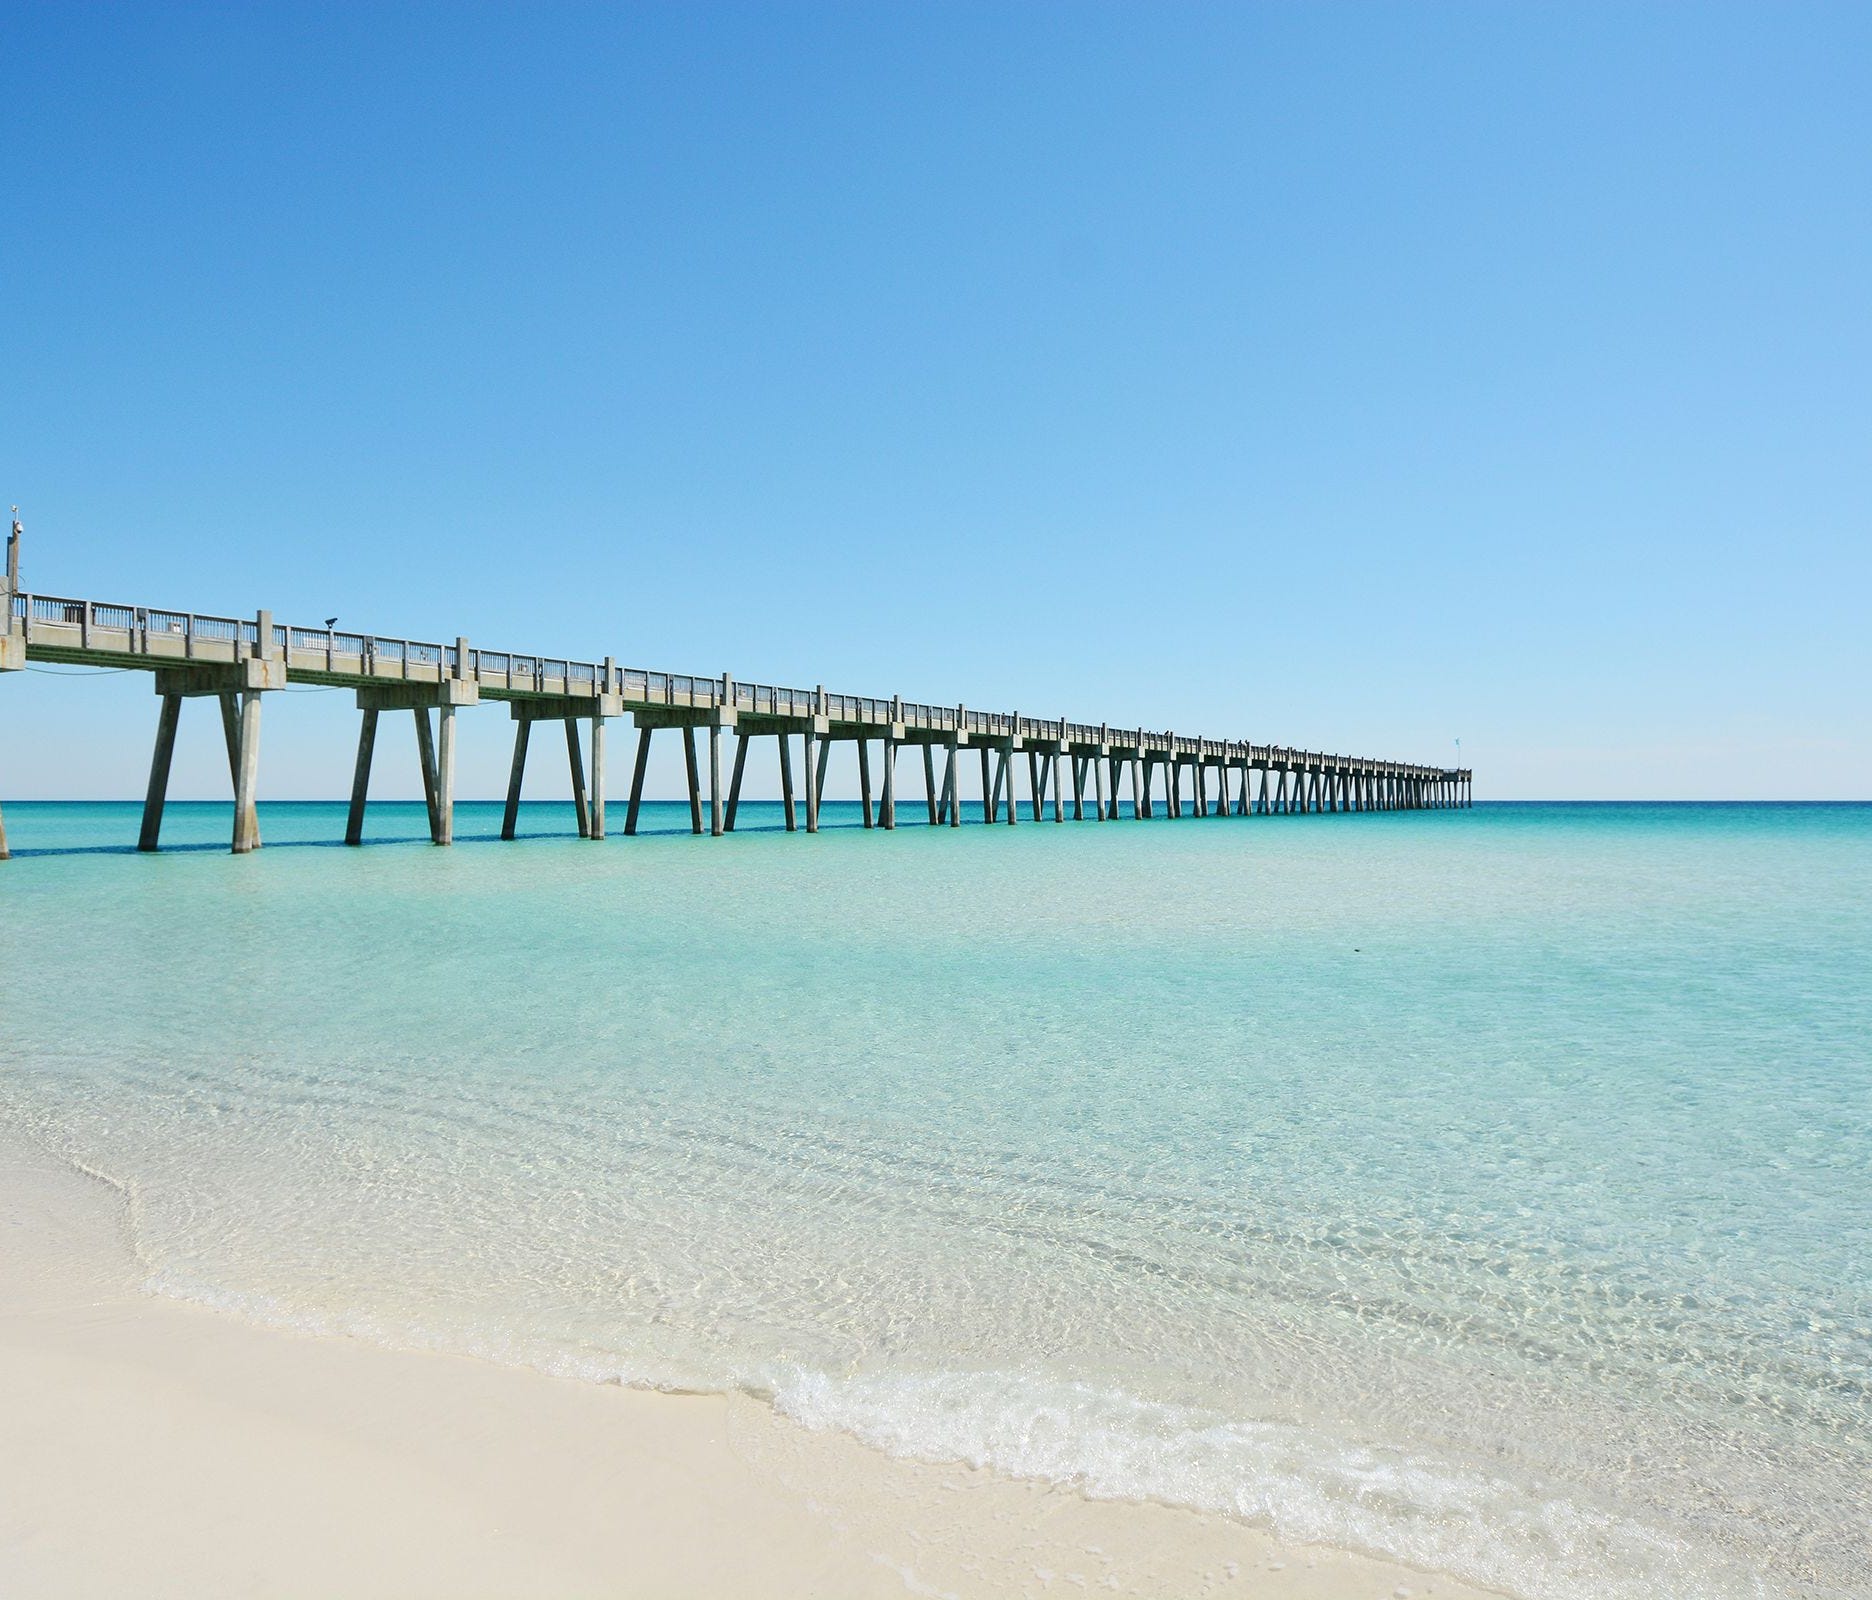 The Pensacola Beach pier is great for fishing and sight seeing.